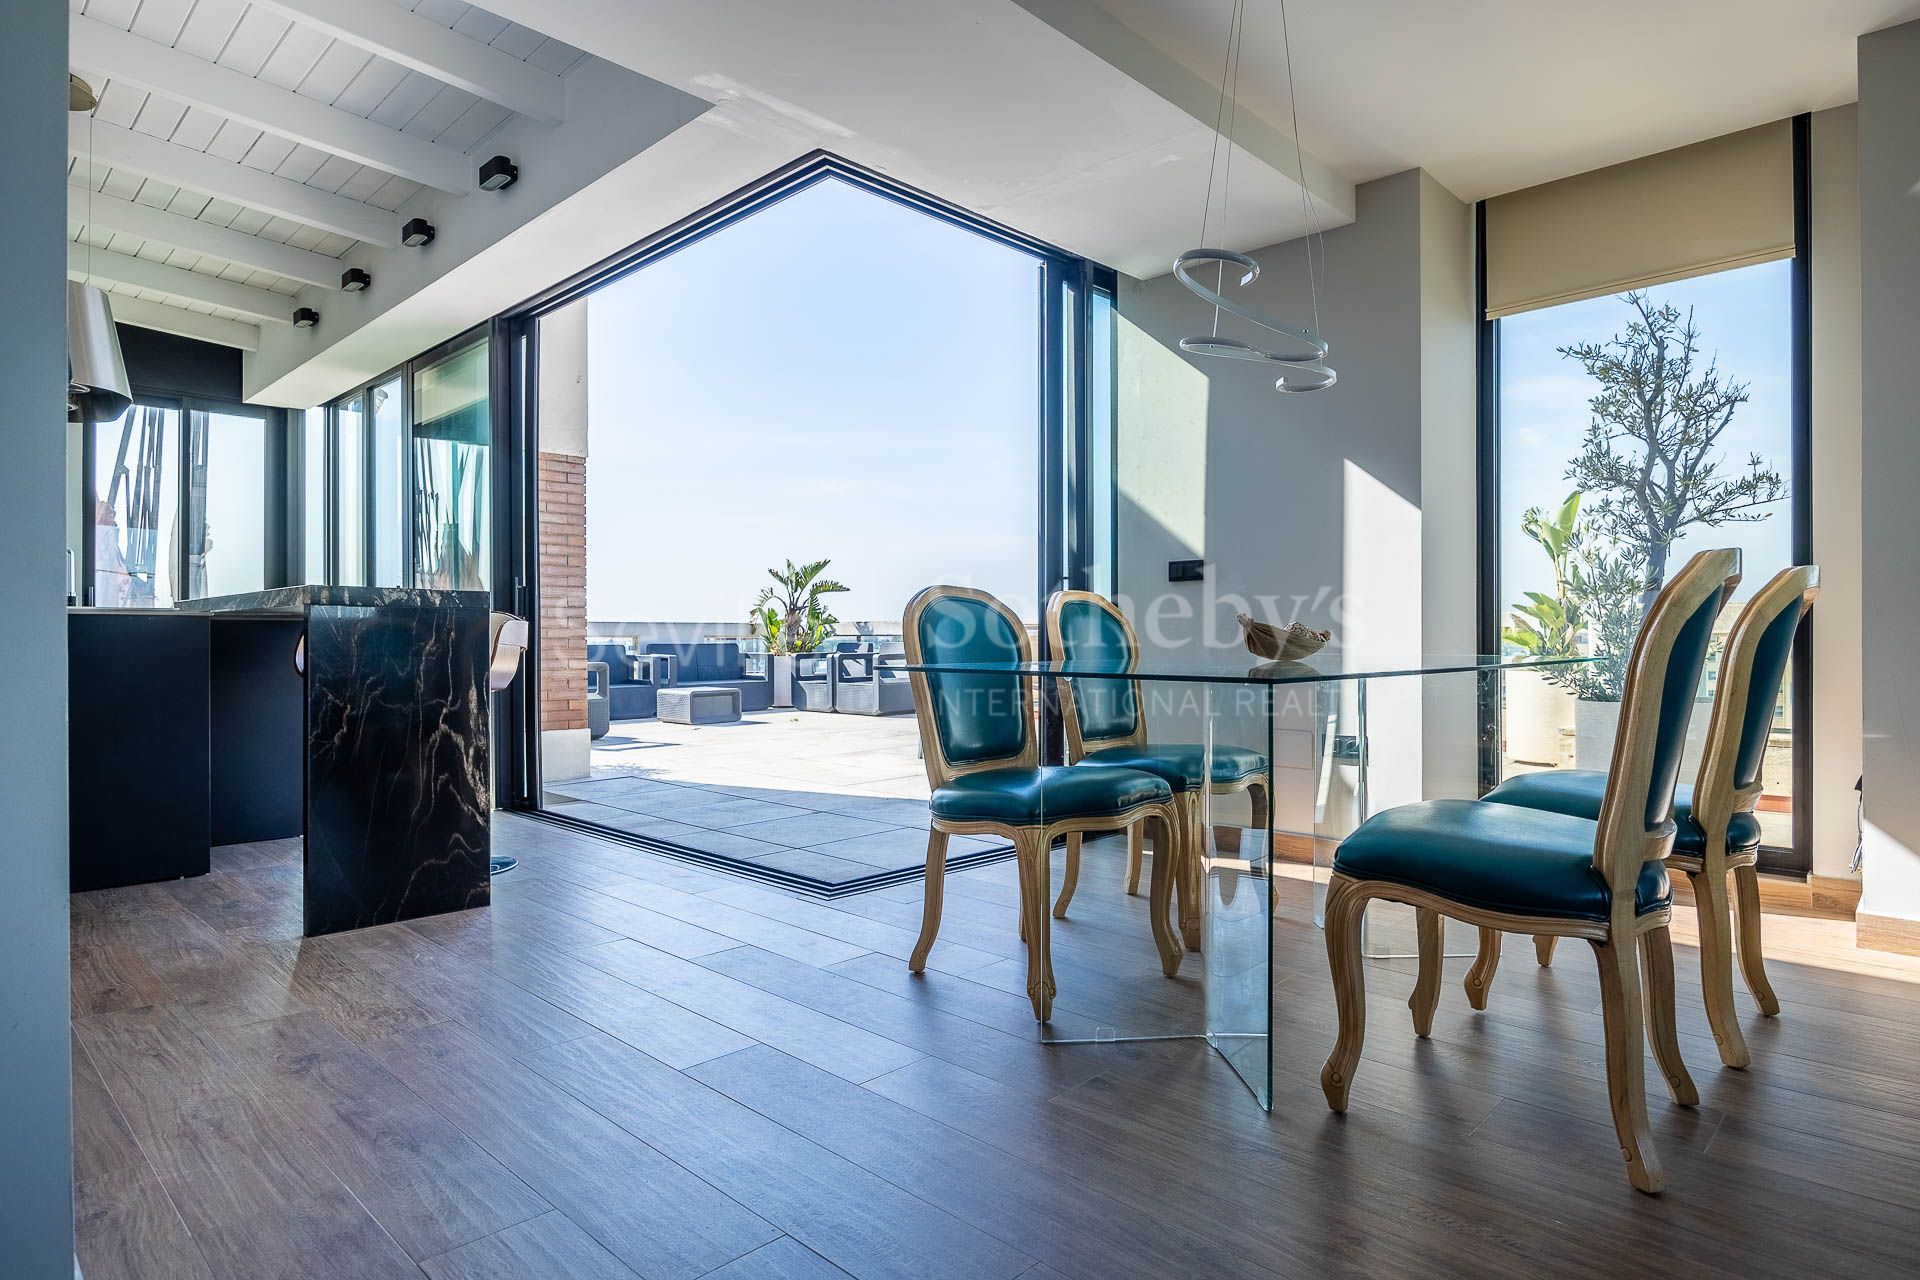 Penthouse with 70 m² terrace in Torneo.